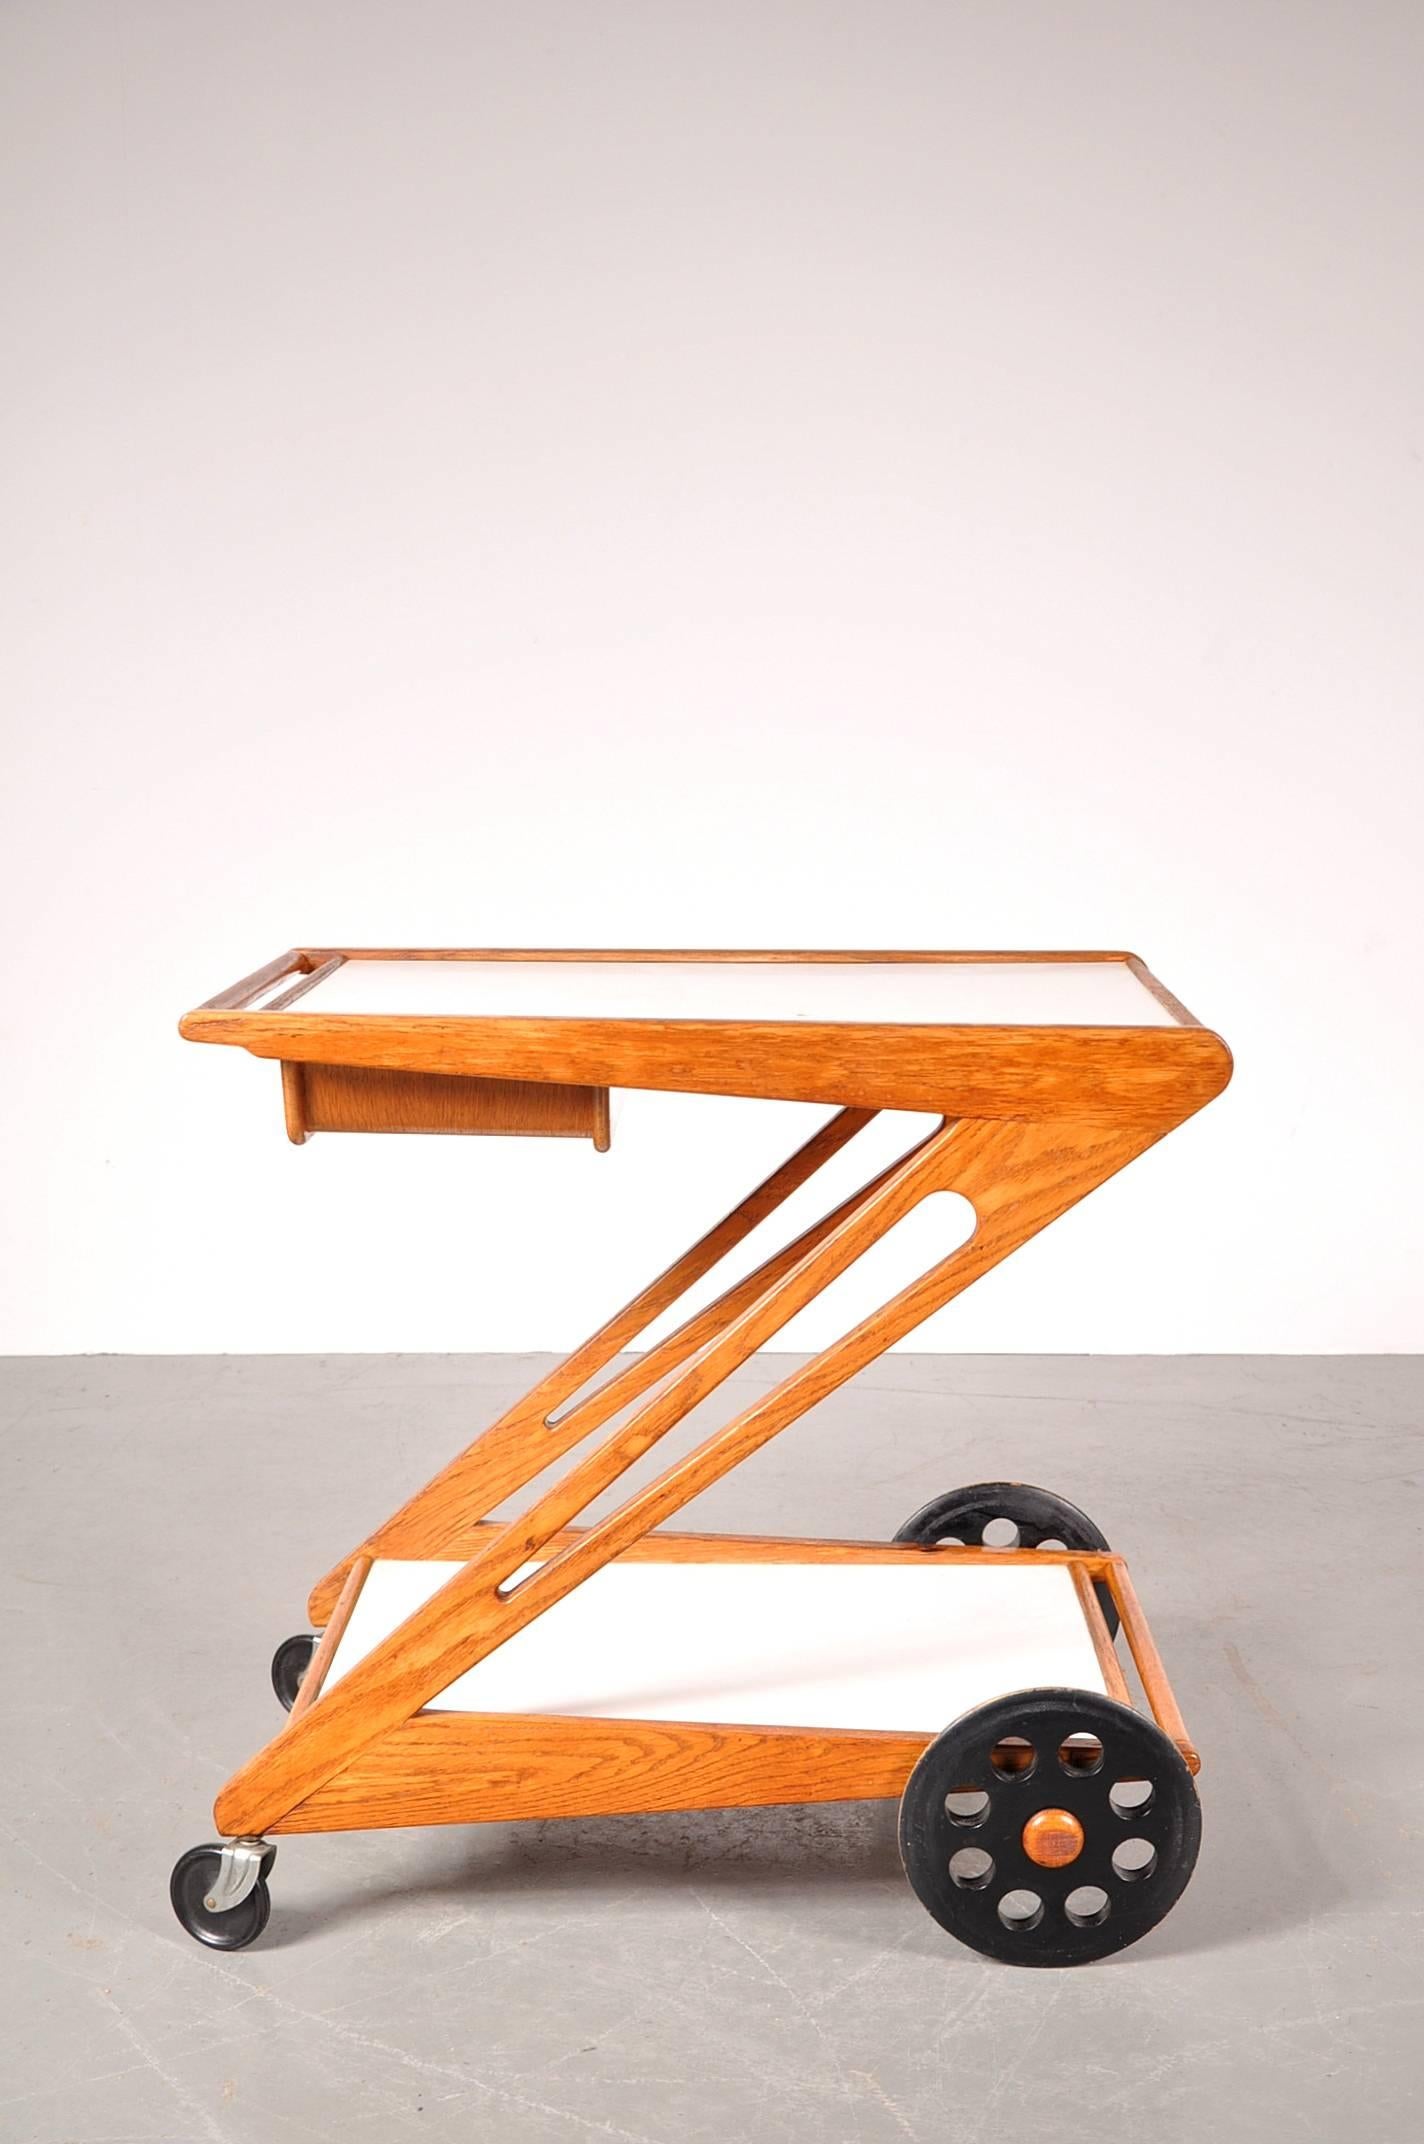 Extreamly rare trolley designed by Cees Braakman, manufactured by Pastoe in the Netherlands, circa 1950.

This unique piece has a oak wooden Z-shaped base with white laminated tops and black wooden weels. The upper top can slide open, revealing a